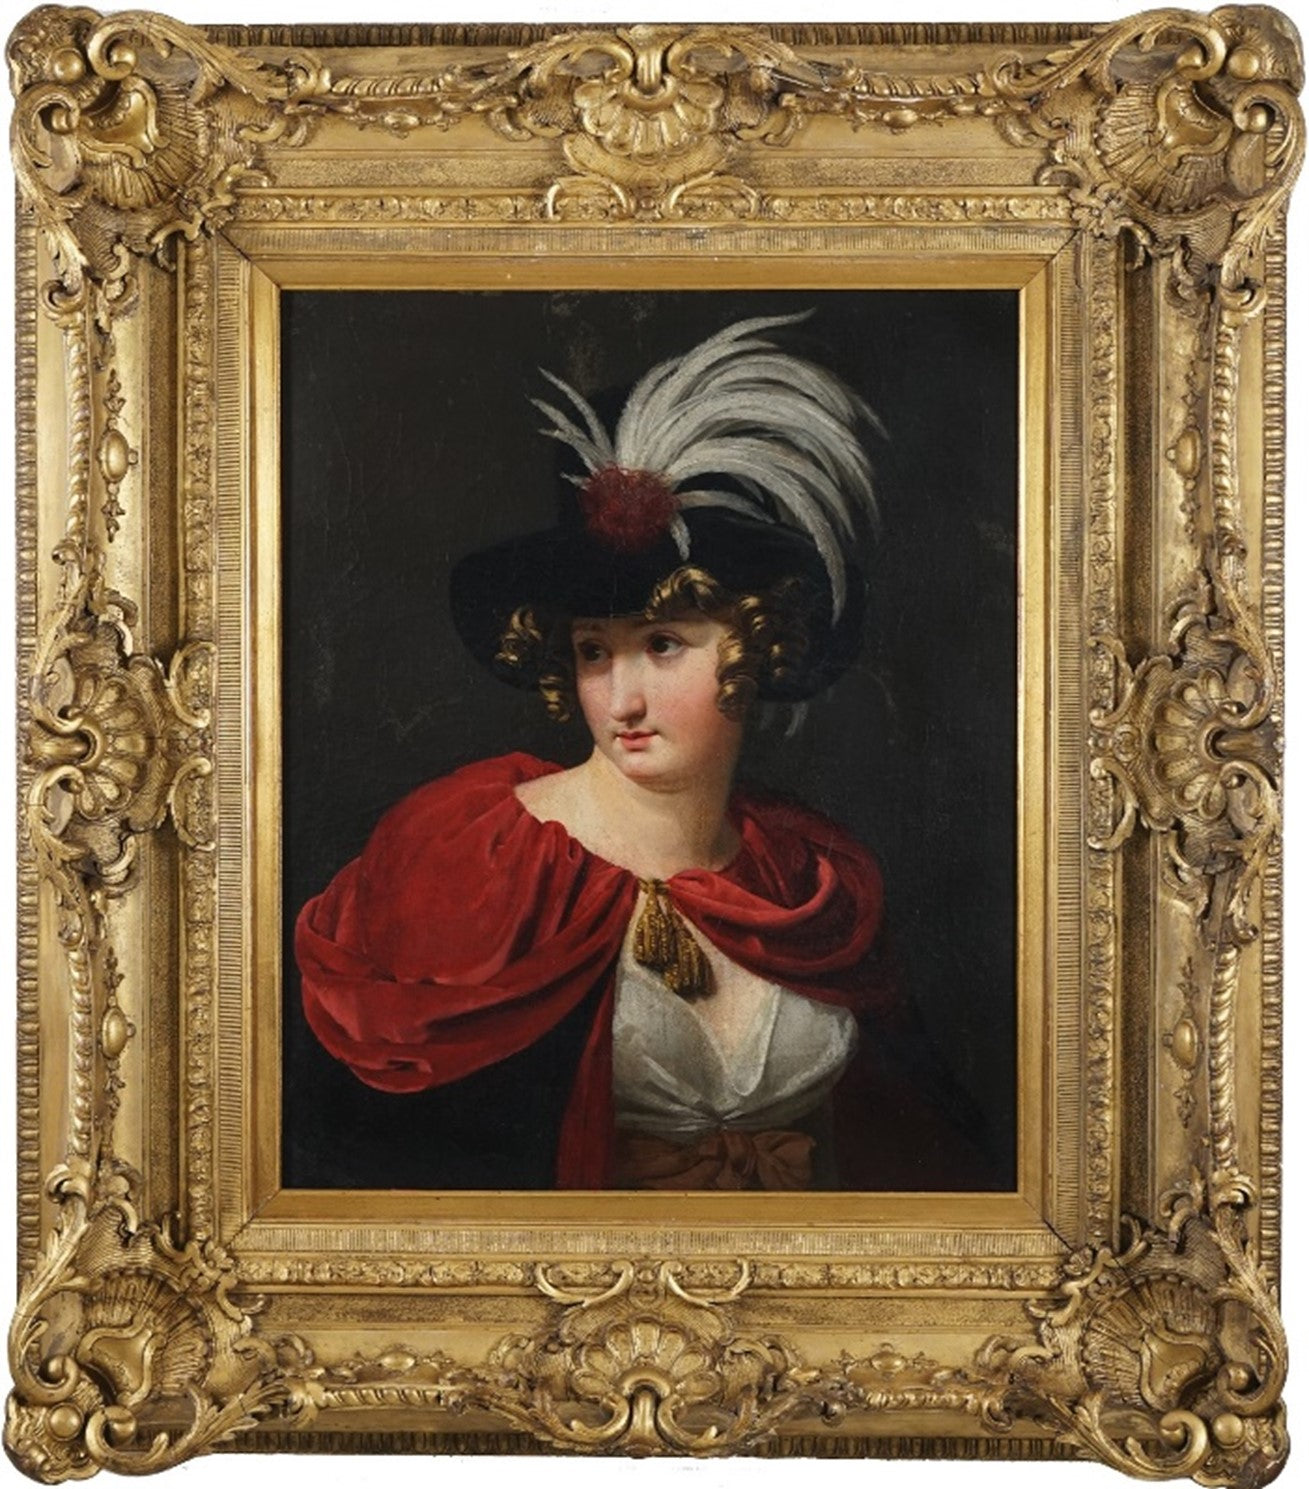 An Early 19th Century English Portrait Painting of Lady in a Giltwood Frame